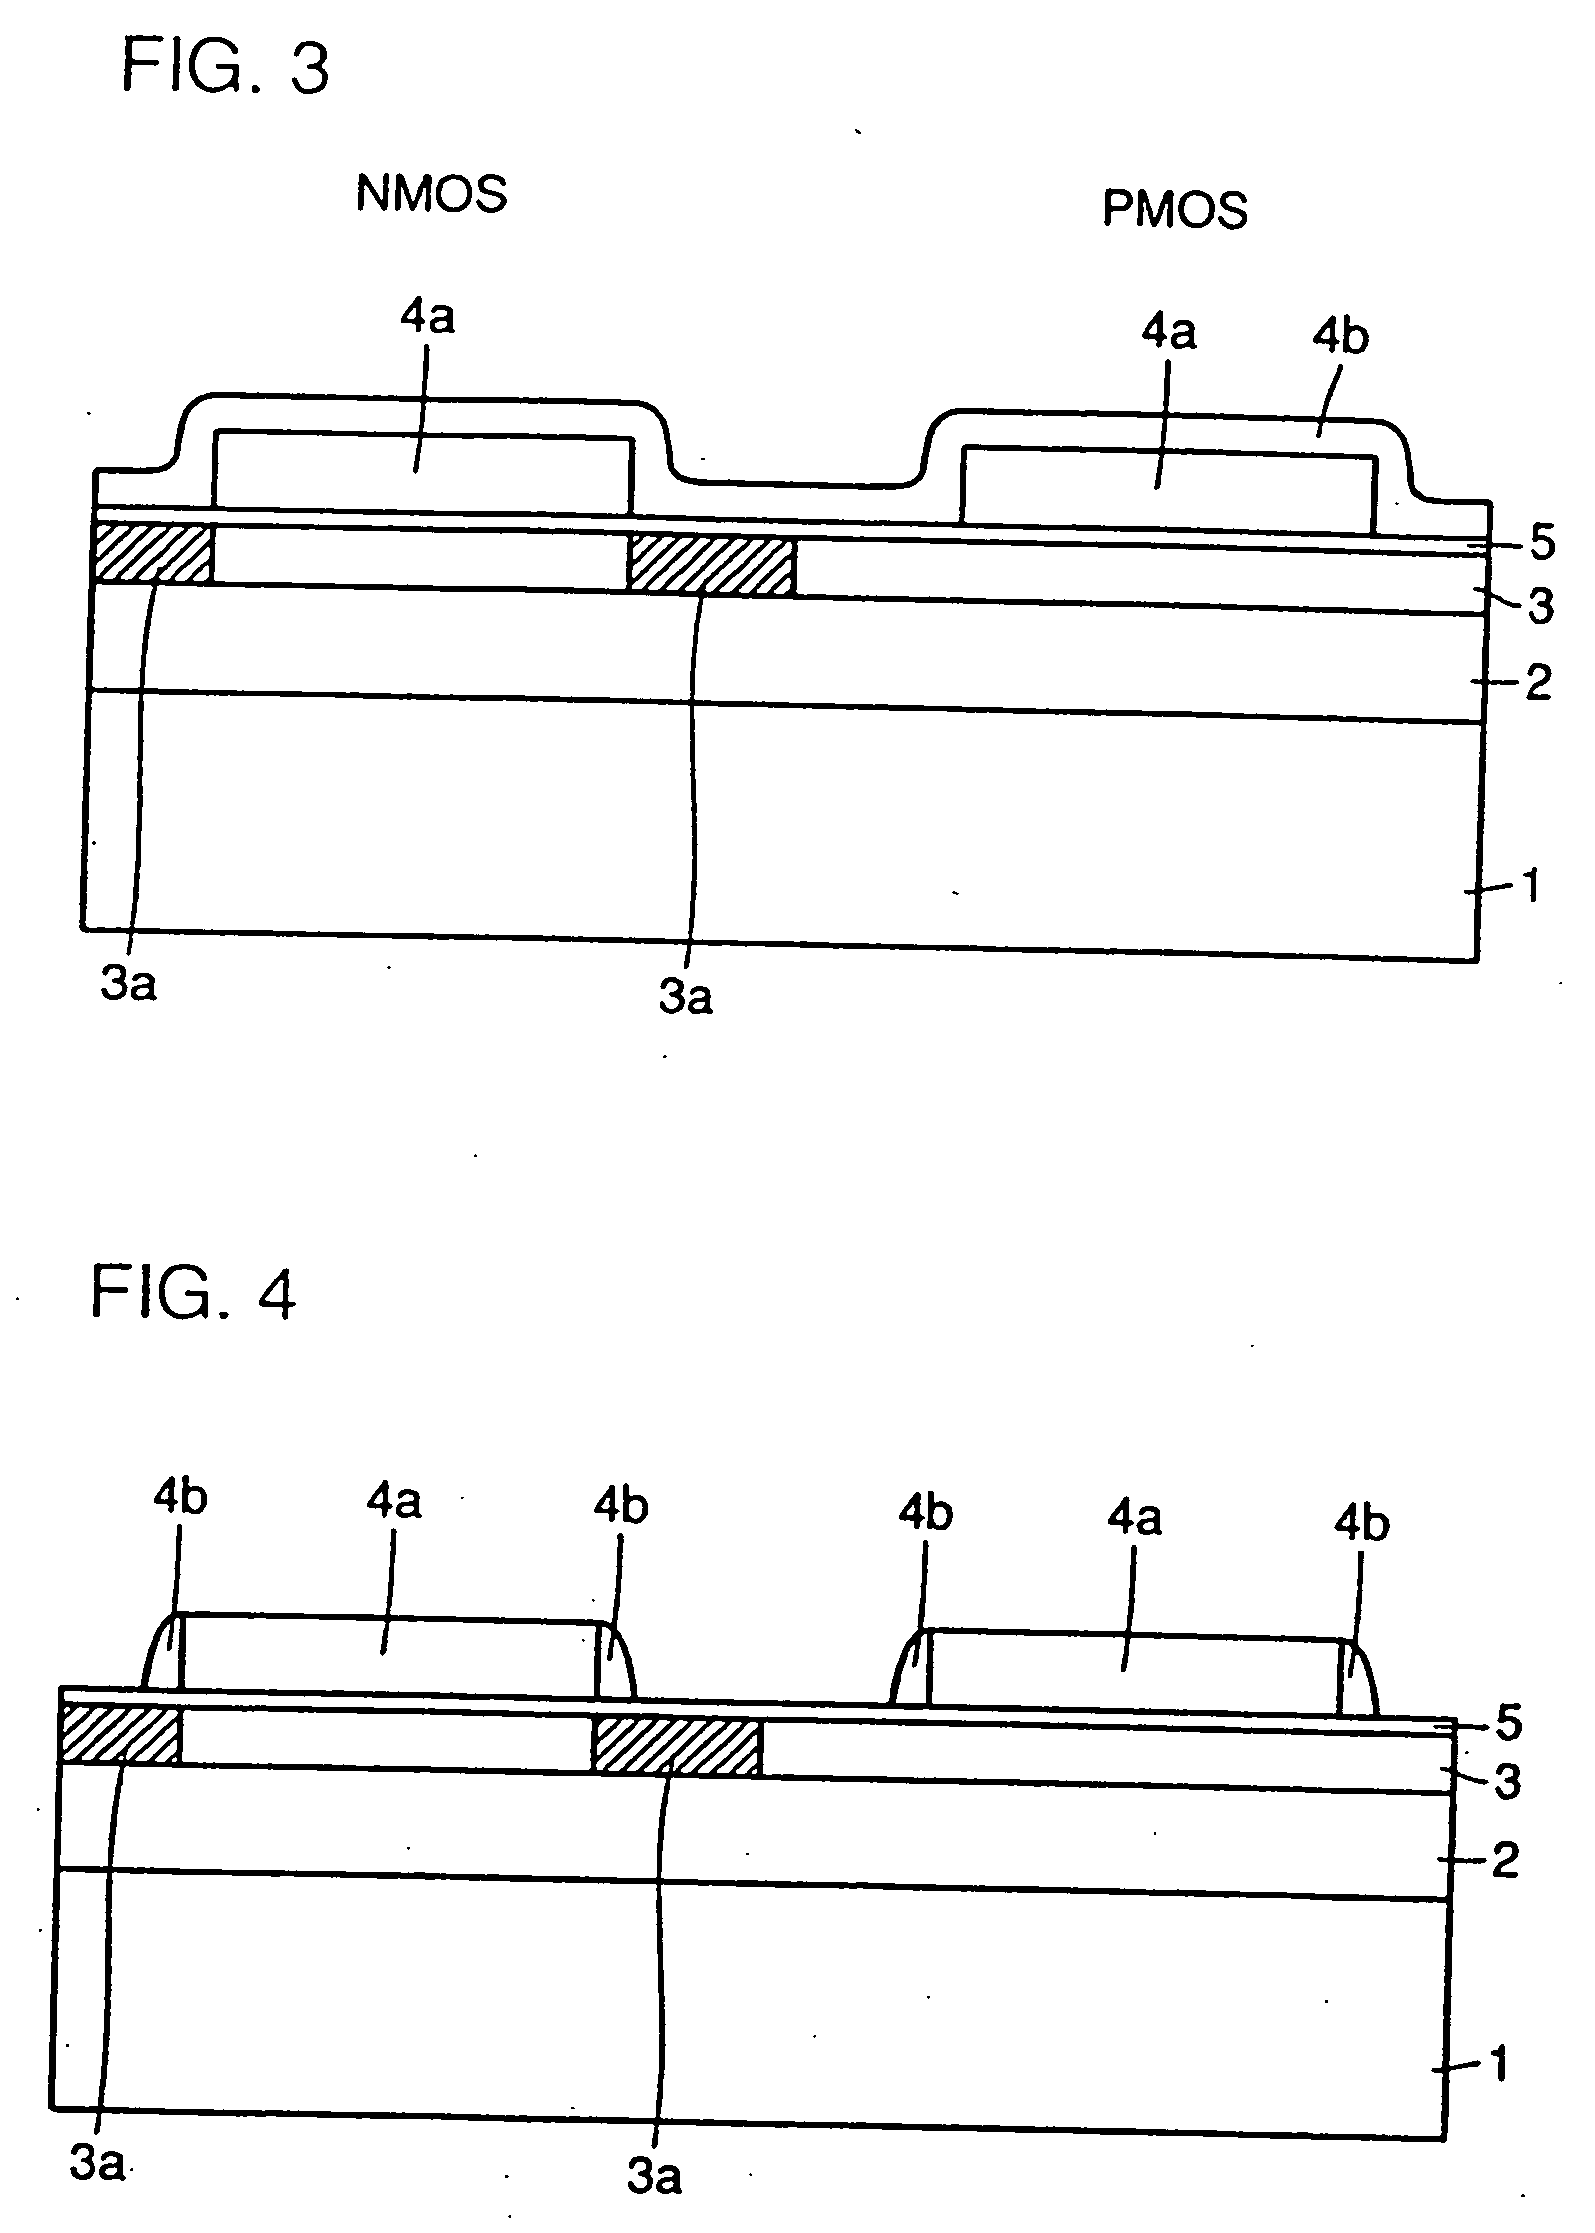 Semiconductor device formed on insulating layer and method of manufacturing the same